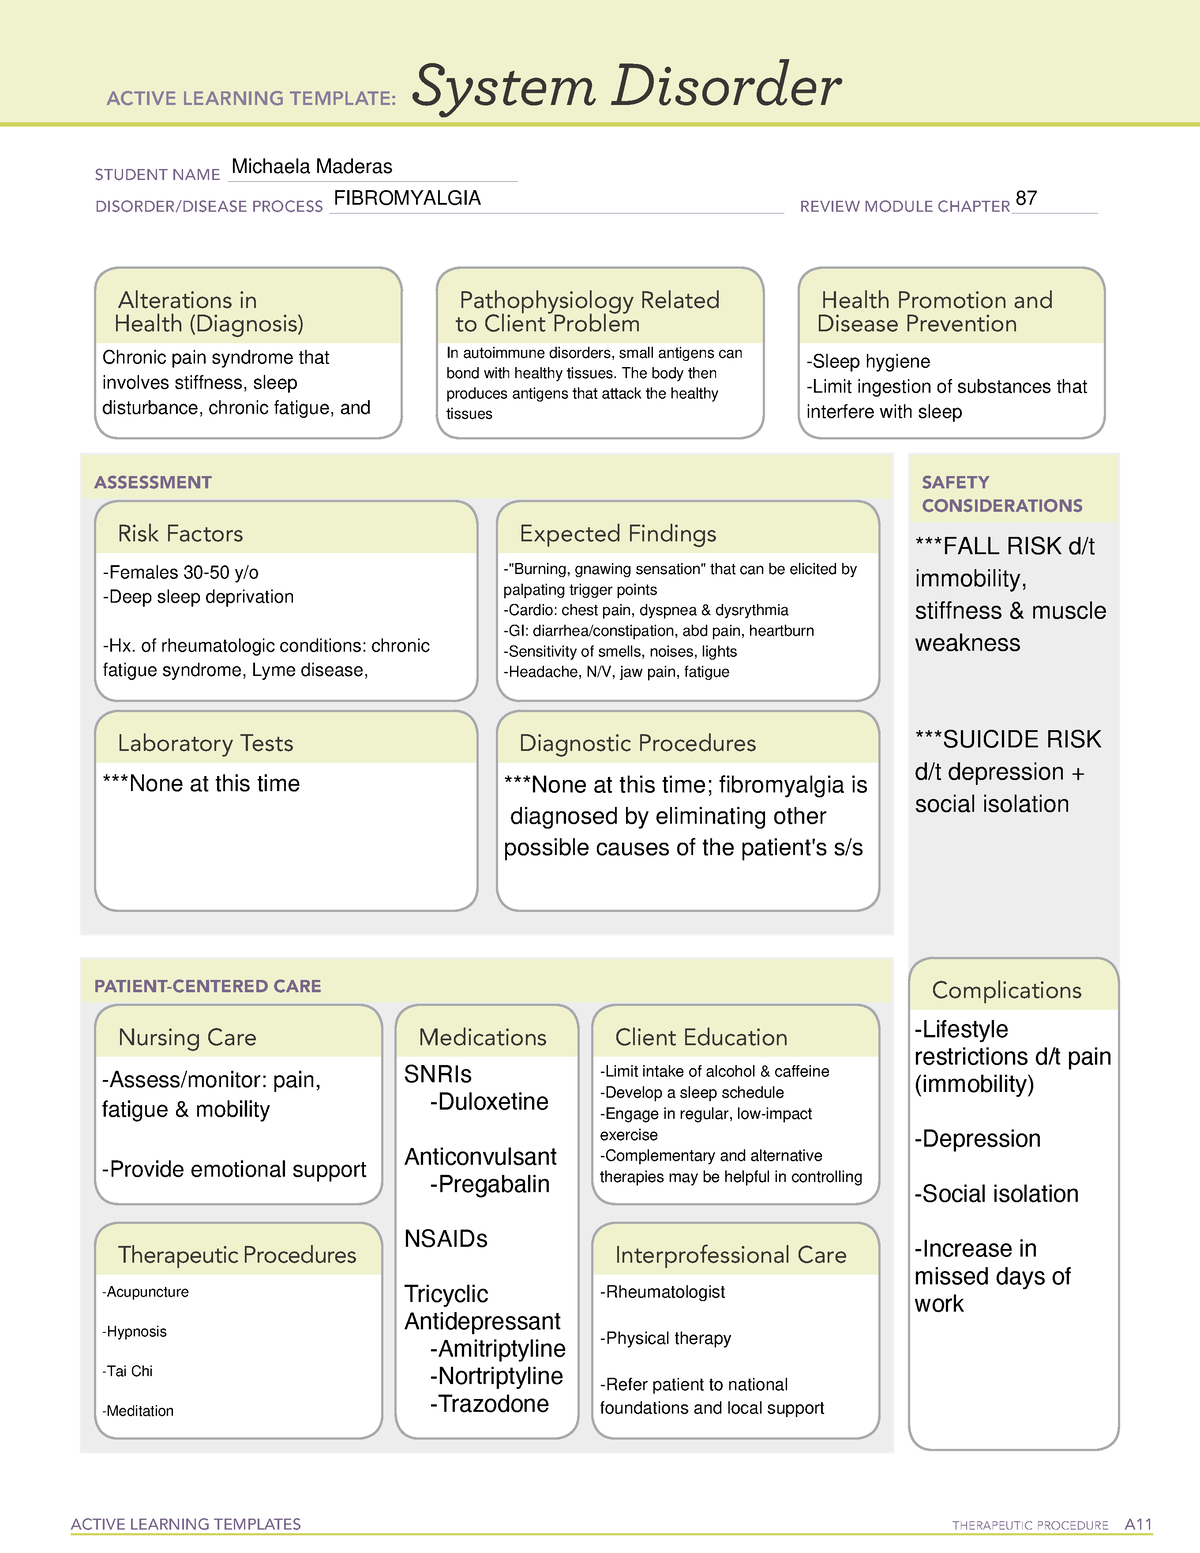 Fibromyalgia - ATI active learning template: Musculoskeletal System ...